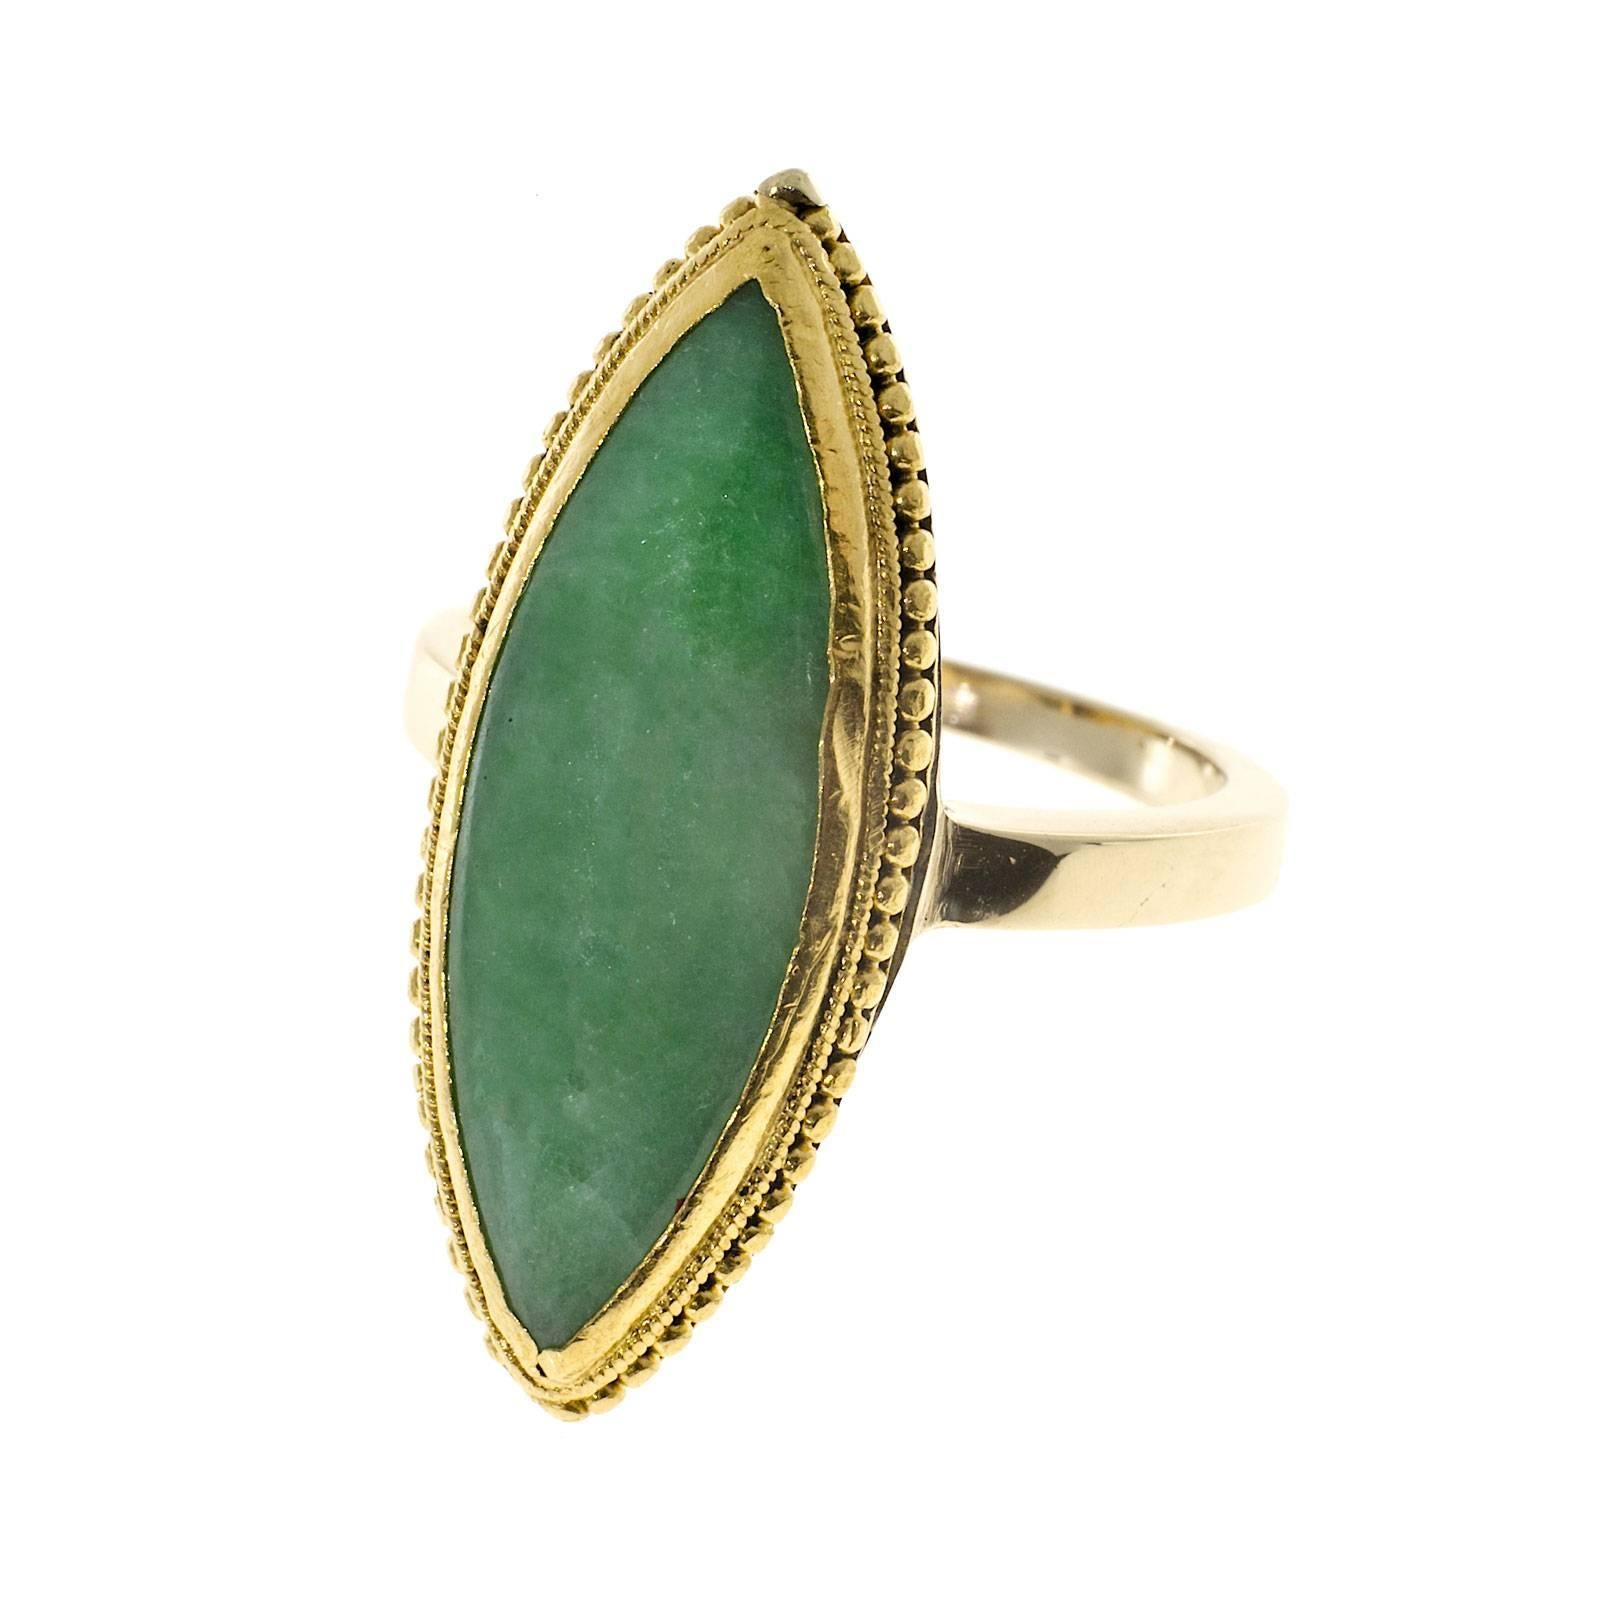 Well-polished GIA certified Jadeite Jade 24.83mm long 24k yellow gold ring with hallmarks under the stone. 

1 Marquise translucent mottled green Jadeite Jade, 24.83 x 8.54mm, GIA certified Jadeite Jade natural no enhancements
24k yellow